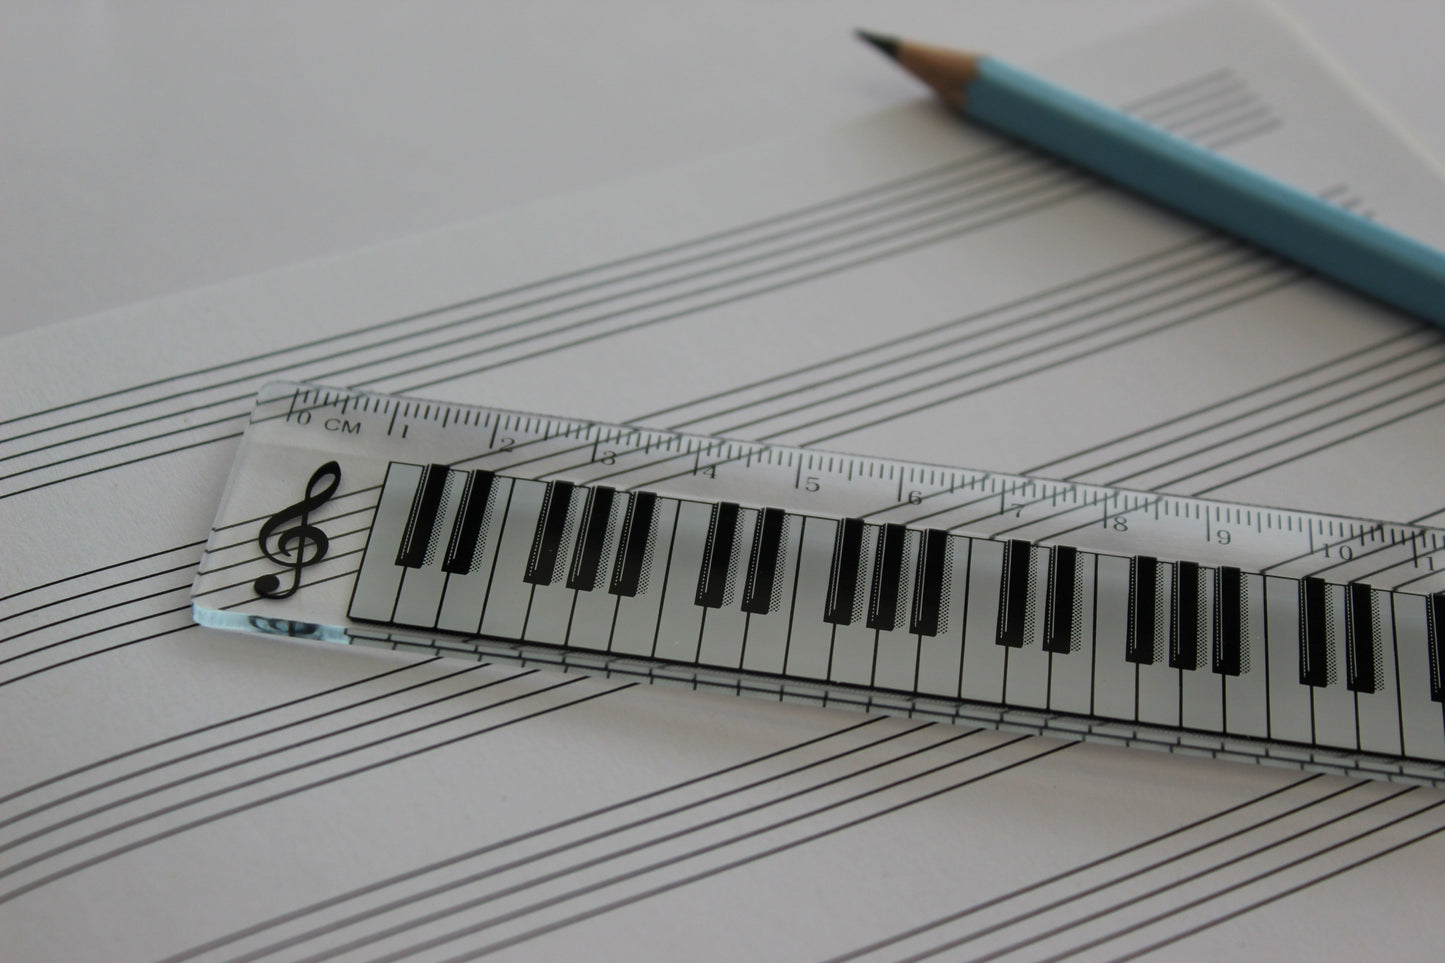 Clear ruler with a piano keyboard. Manuscript paper and a pencil in the background.